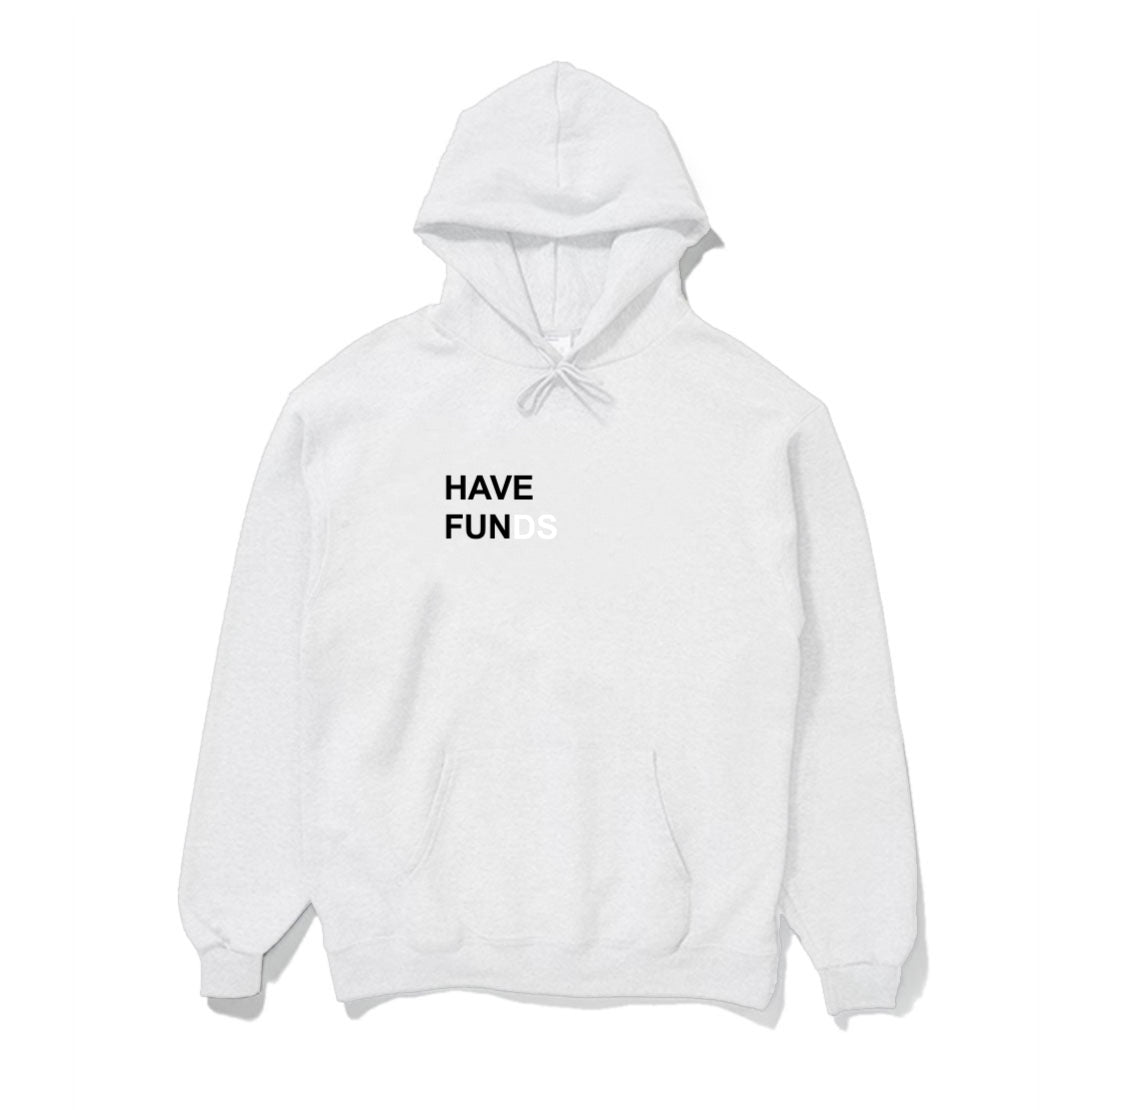 HAVE FUNDS HOODIE